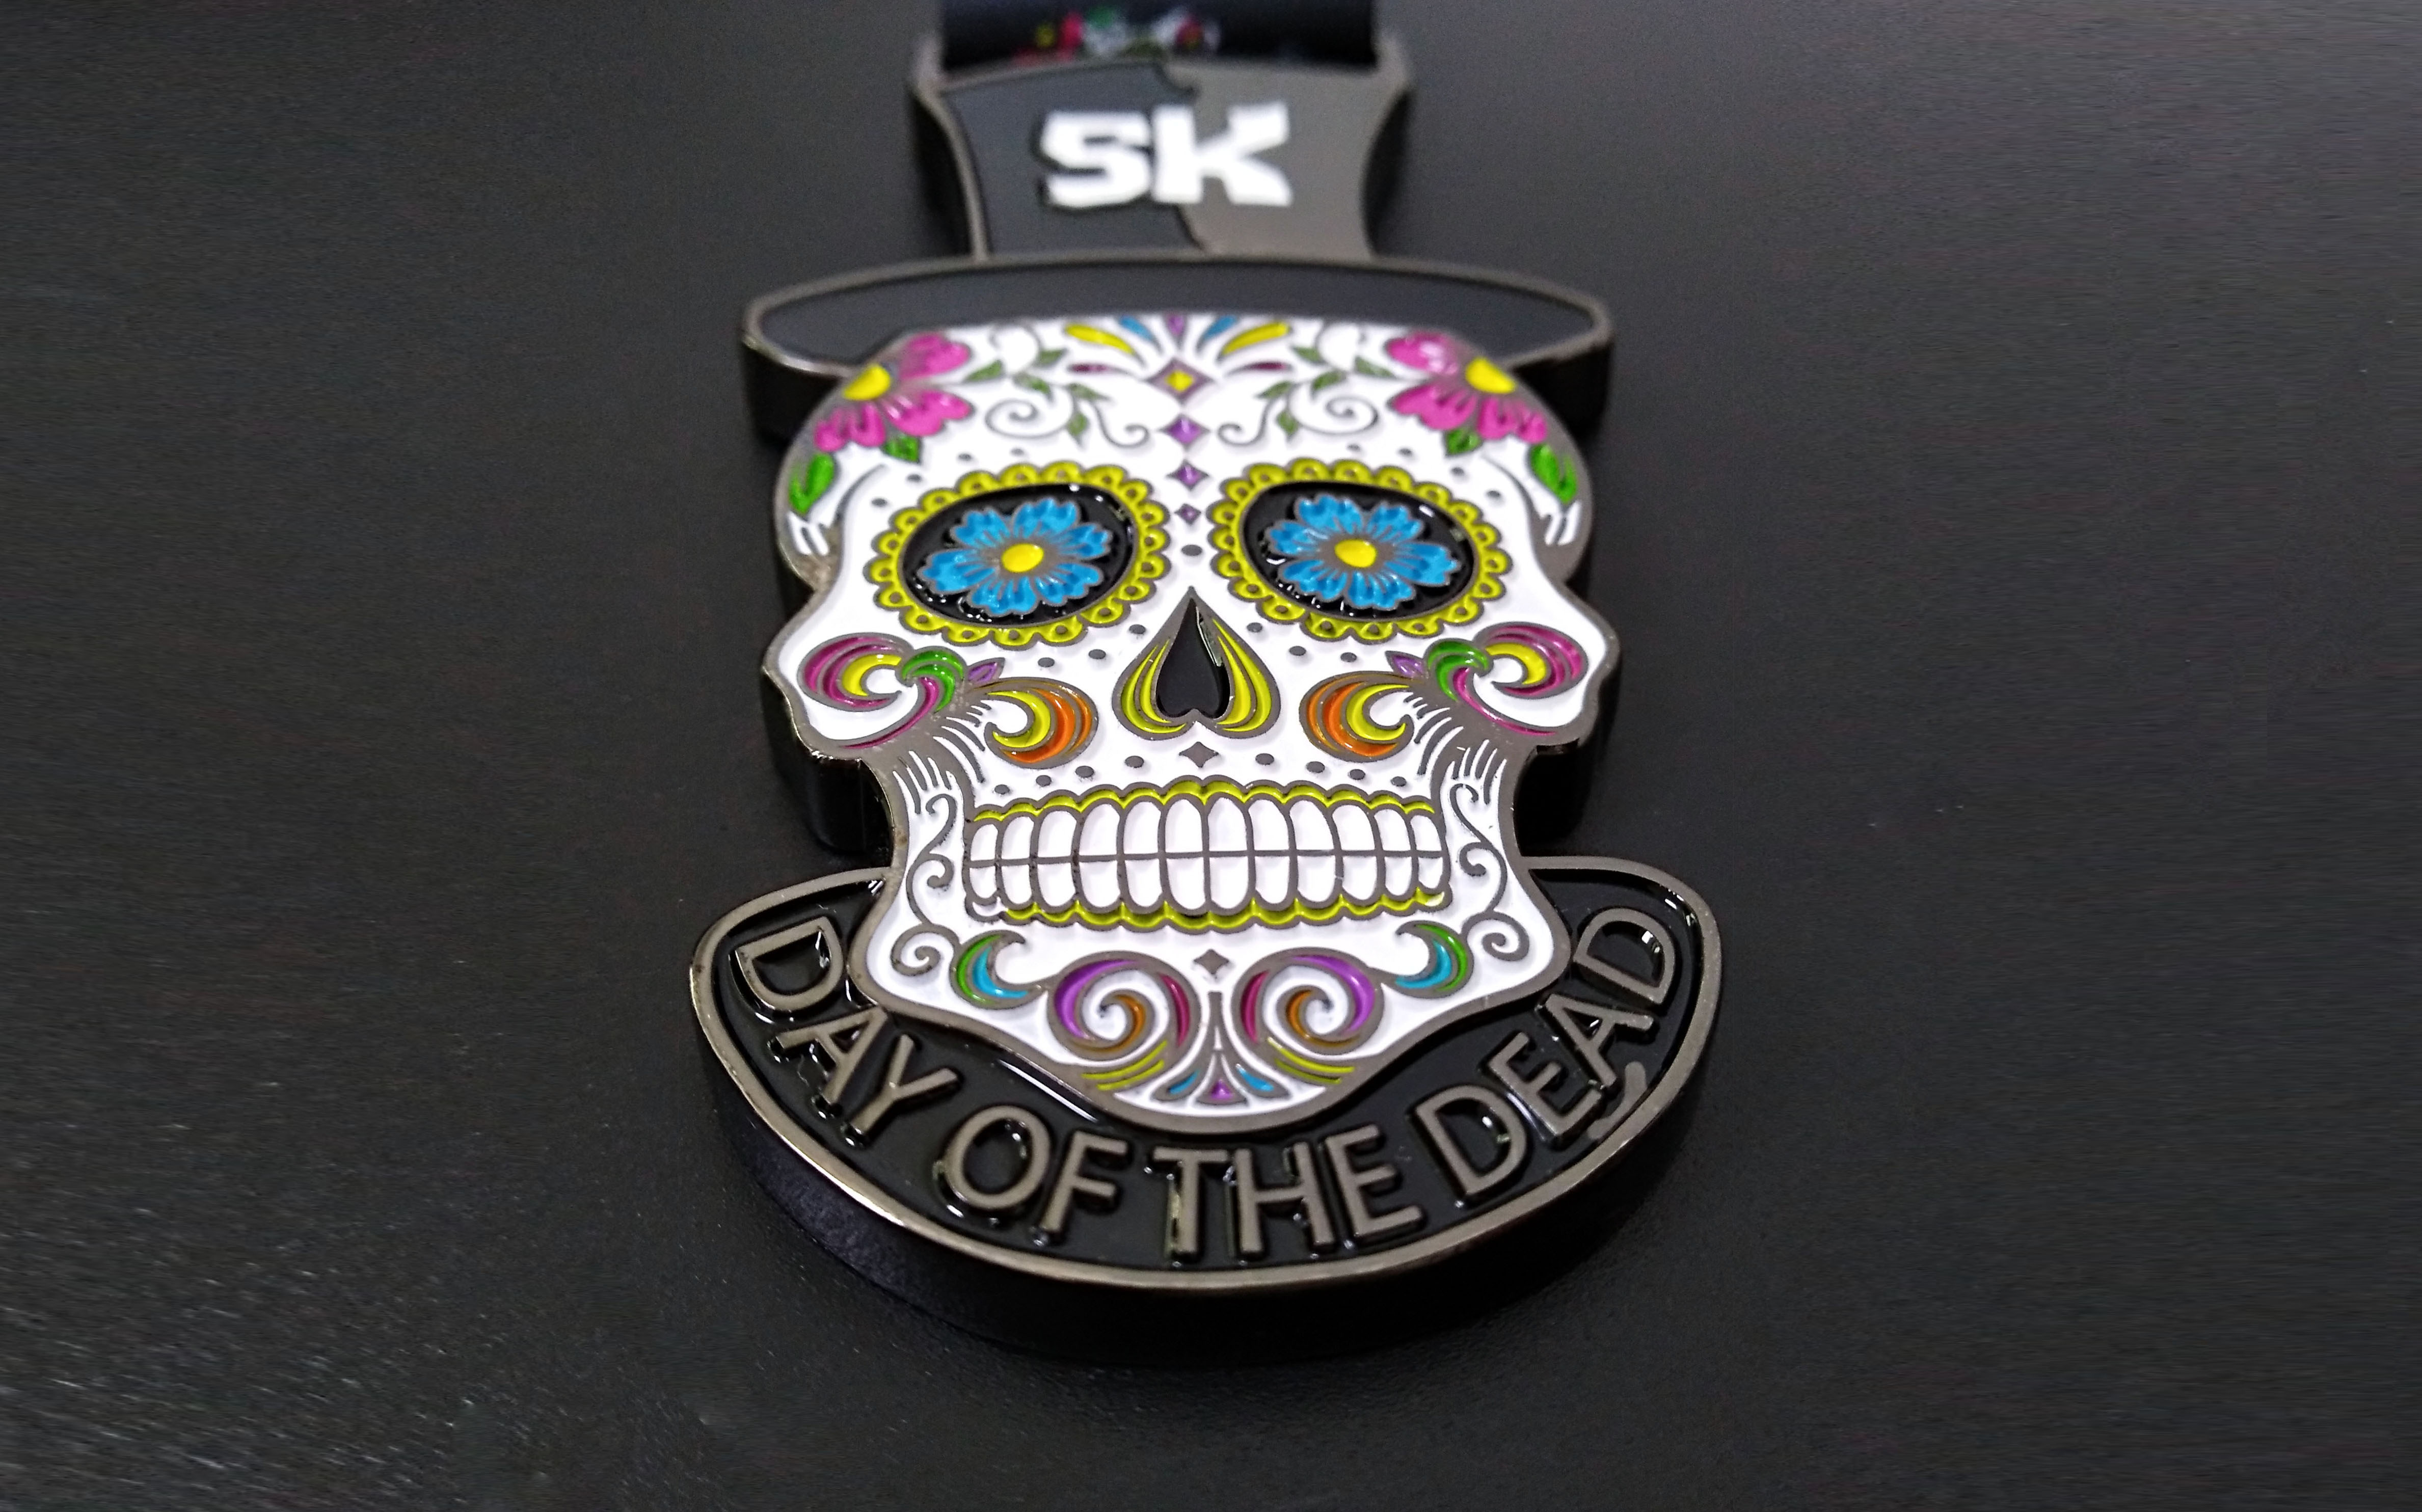 How to design virtual race medals and choose the medal supplier